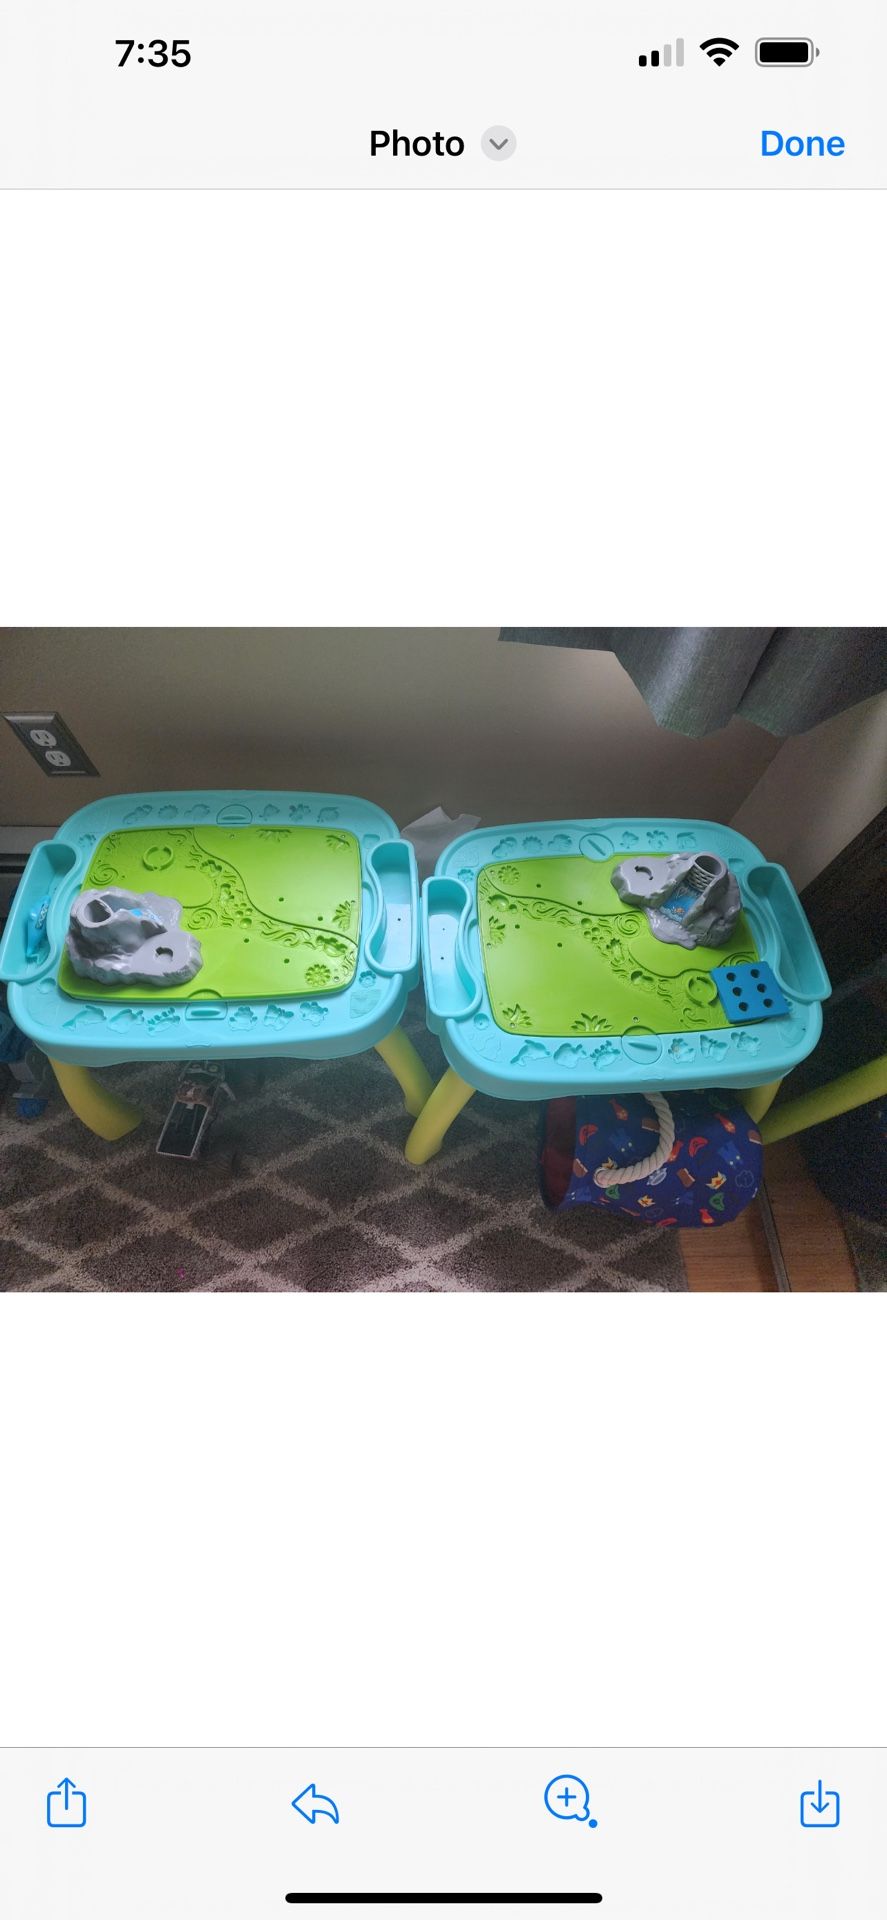 Two Play Dough Tables 